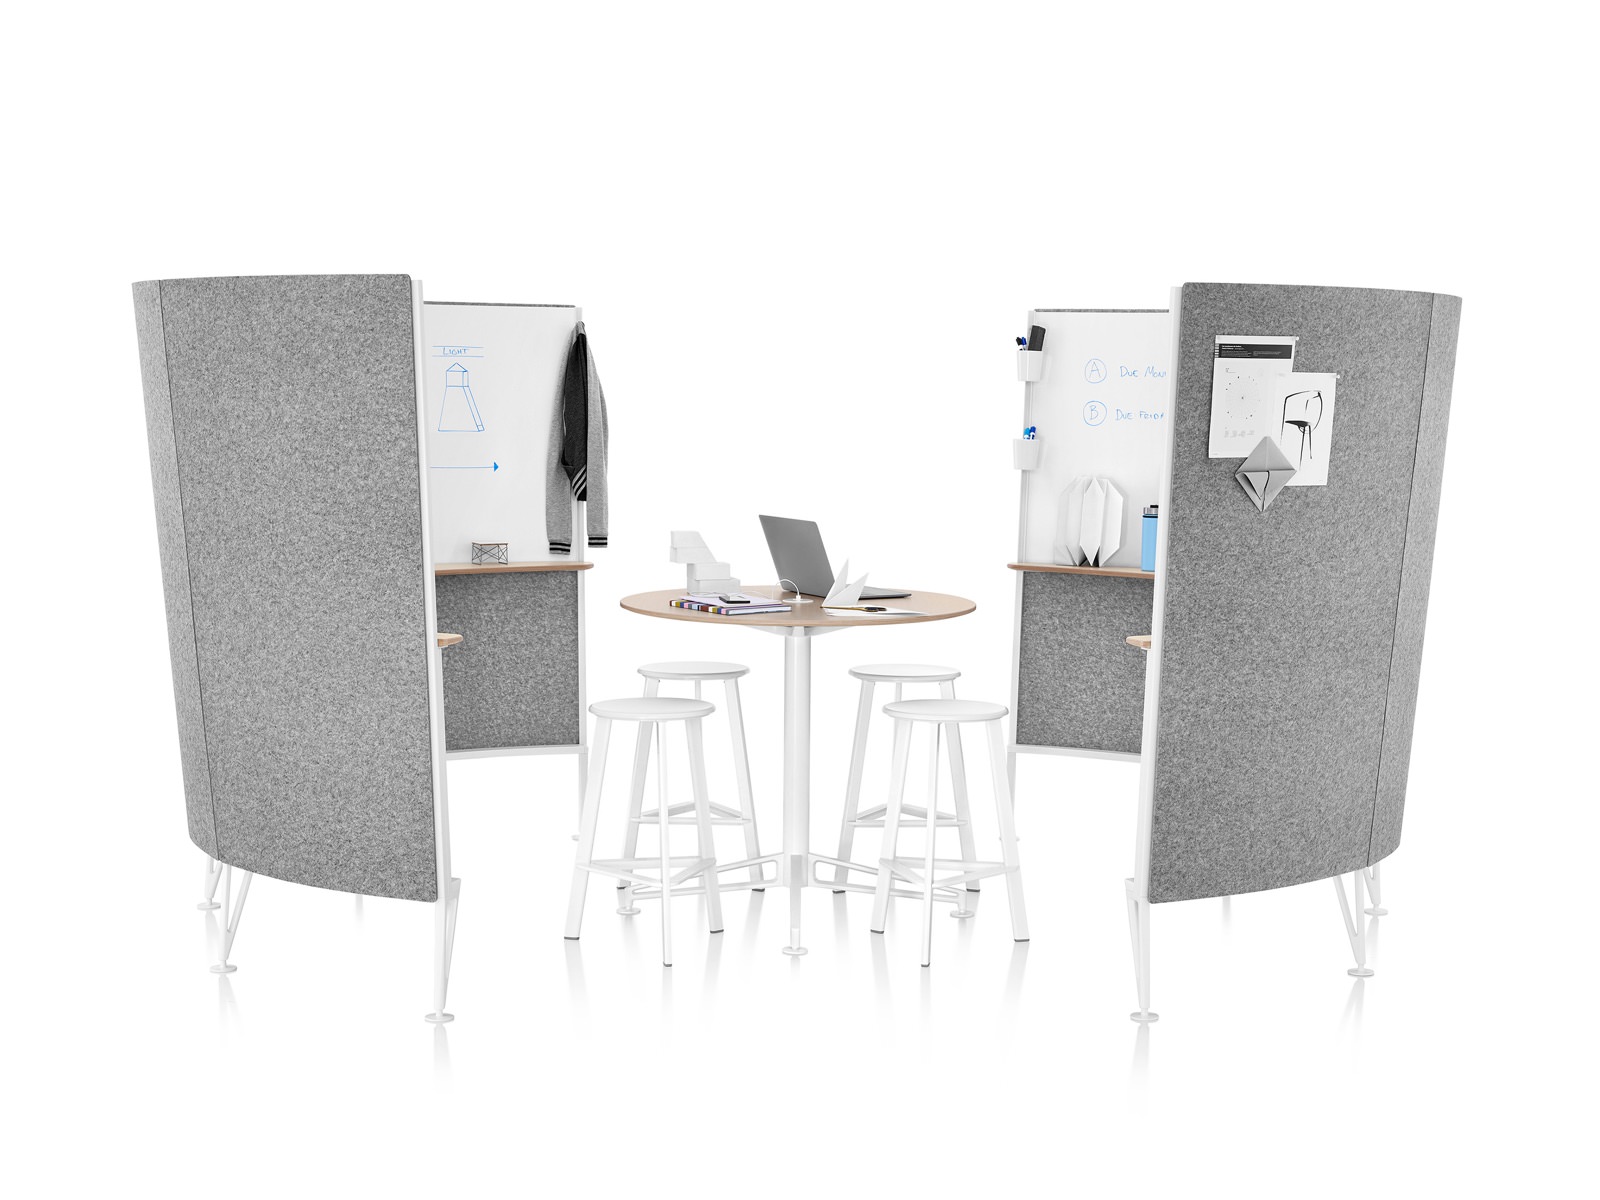 Two four-panel screens with gray acoustic fabric form a semi-enclosed Prospect Creative Space containing a high table and four stools.